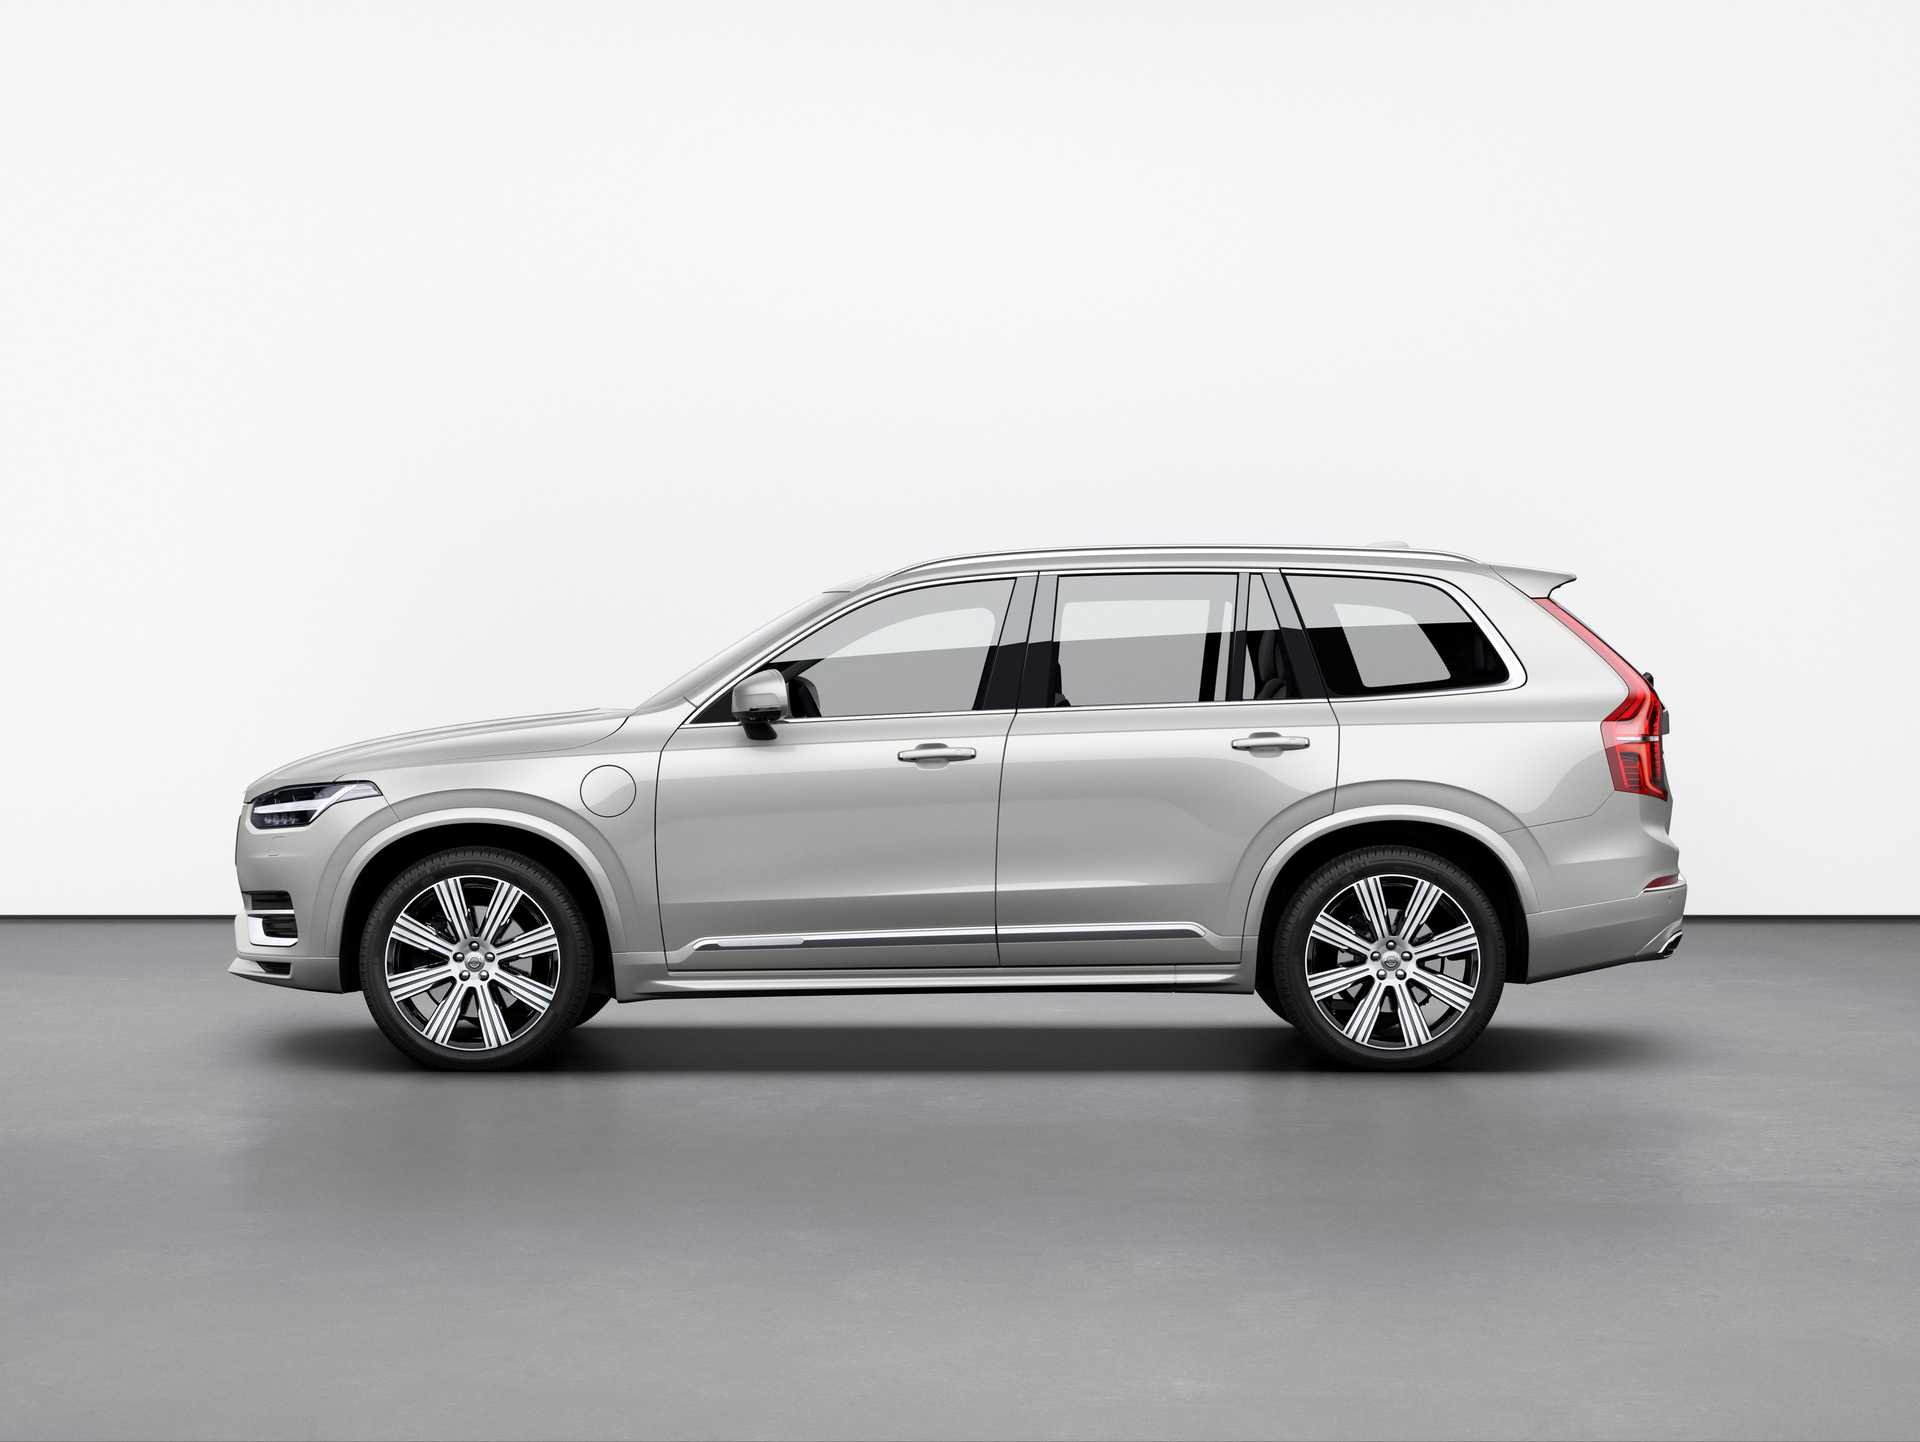 Fichiers Tuning Haute Qualité volvo XC90 2.0 T8 Twin Engine 390hp